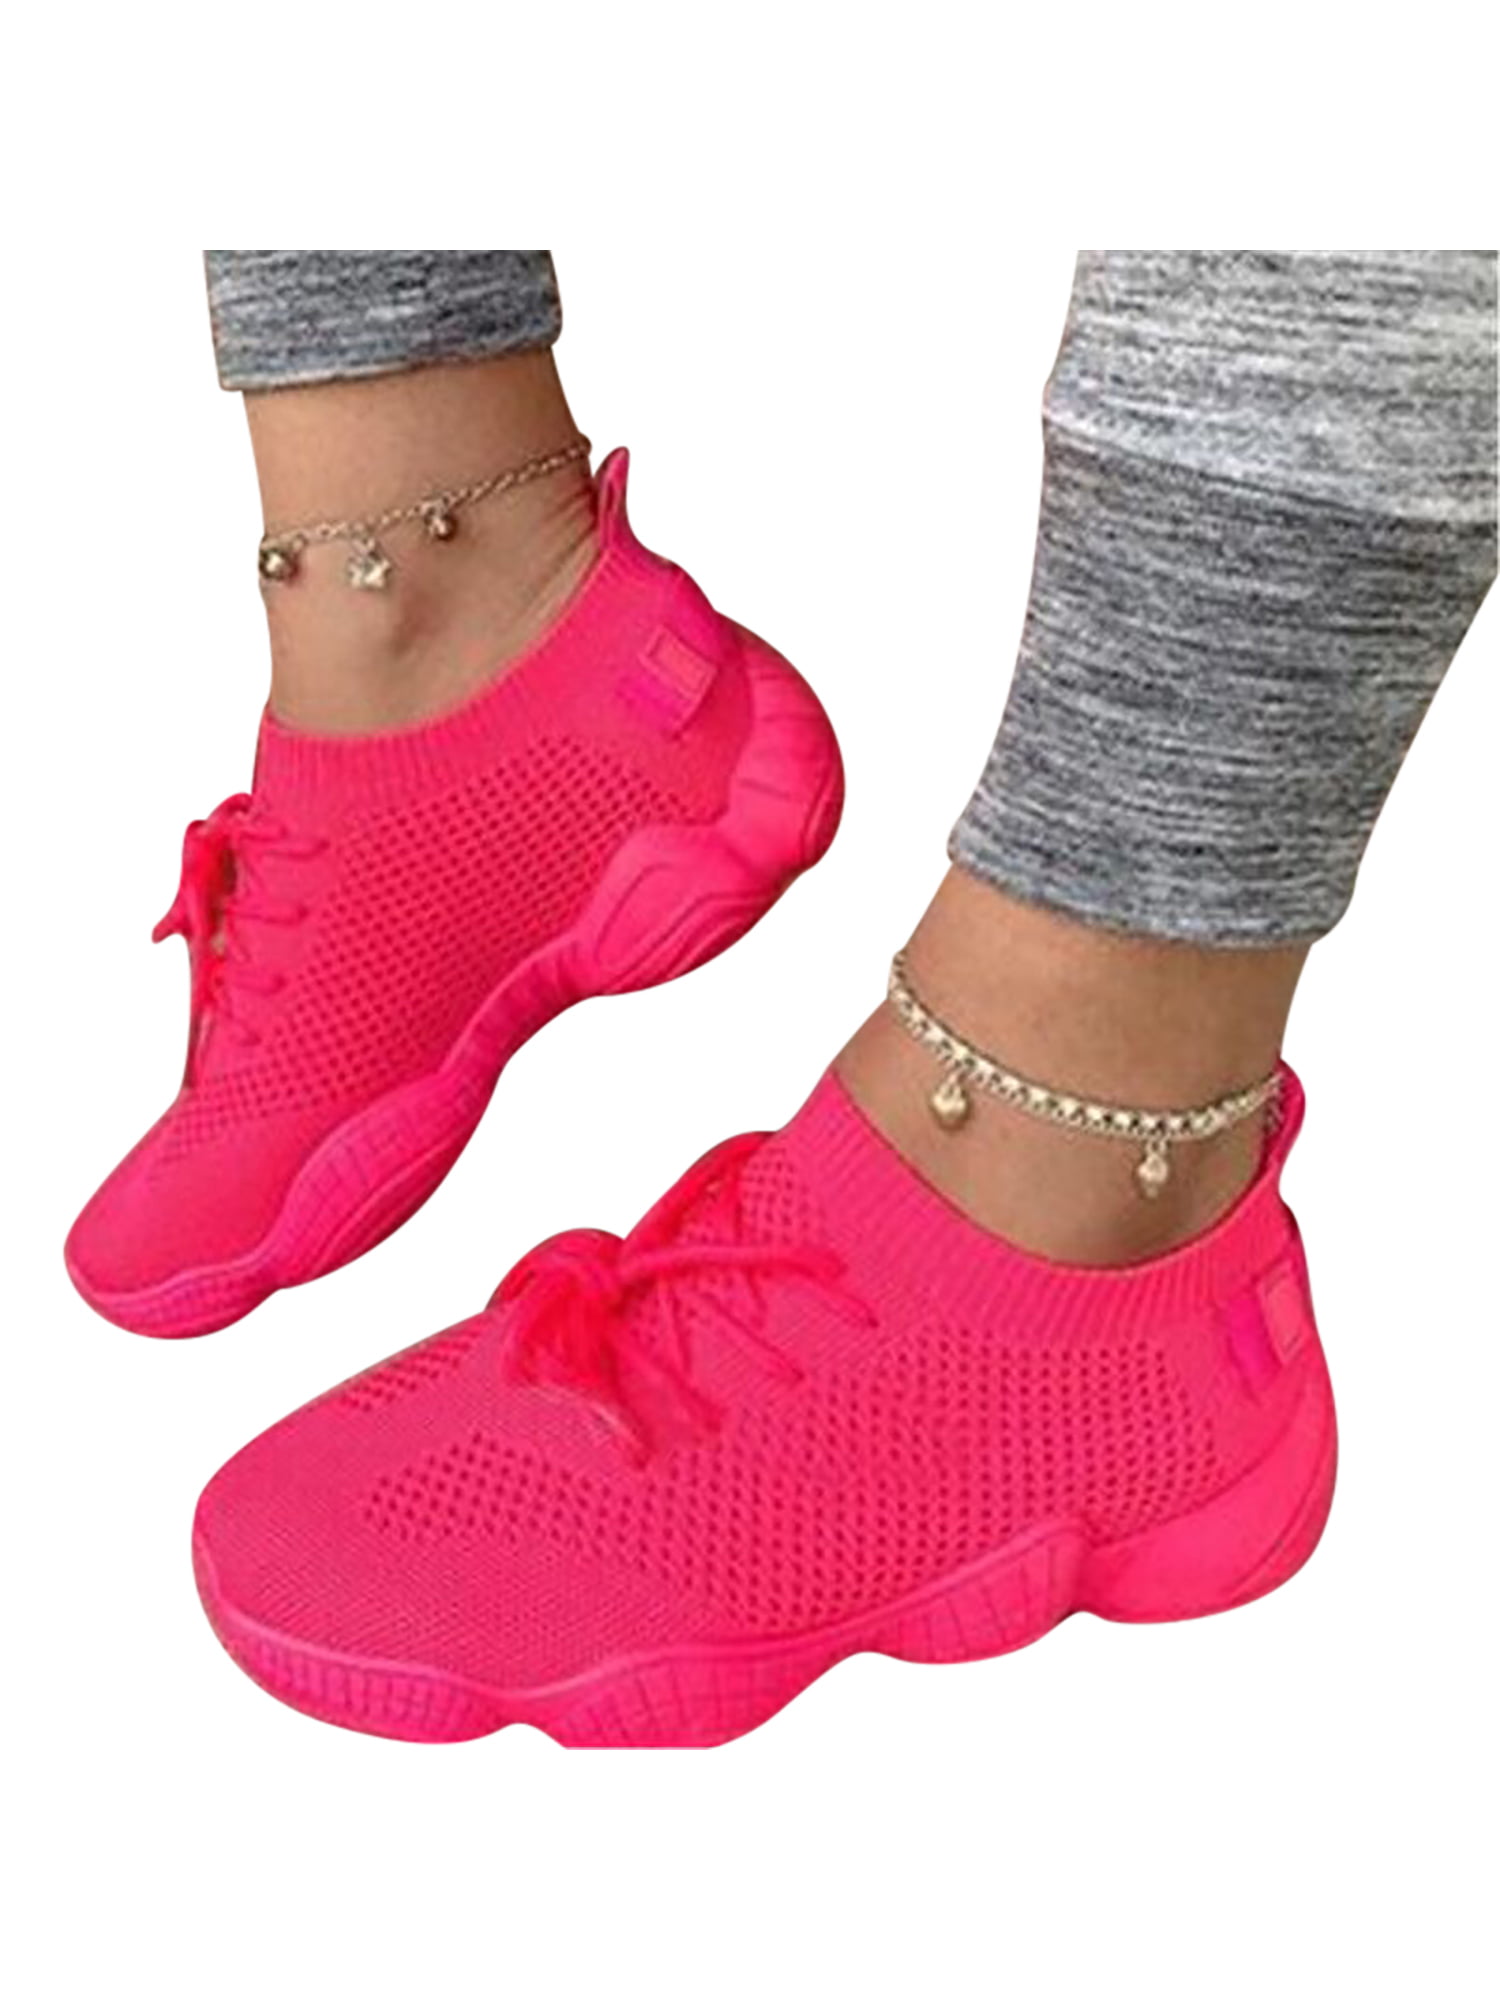 Women Tennis Shoes Ladies Running Athletic Sneakers Breathable Outdoor Sports 